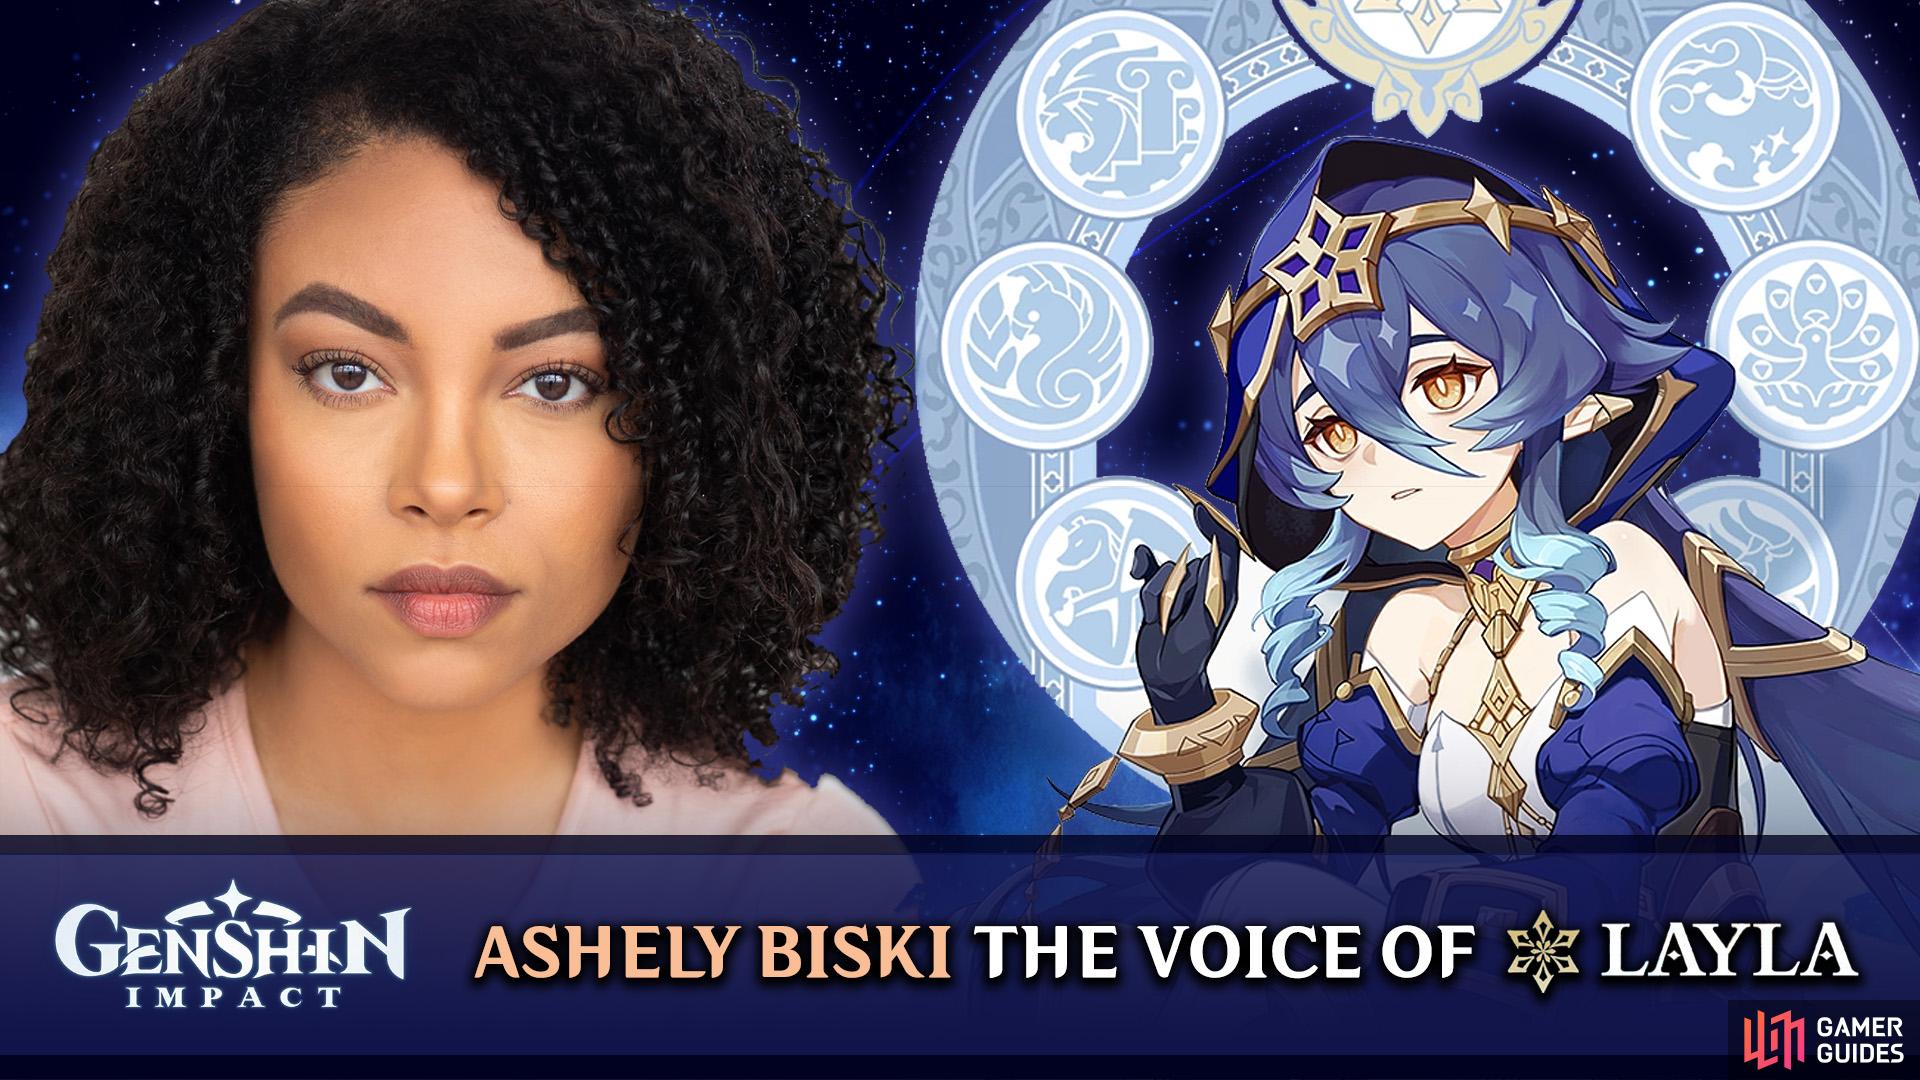 Ashely Biski the voice of Layla.